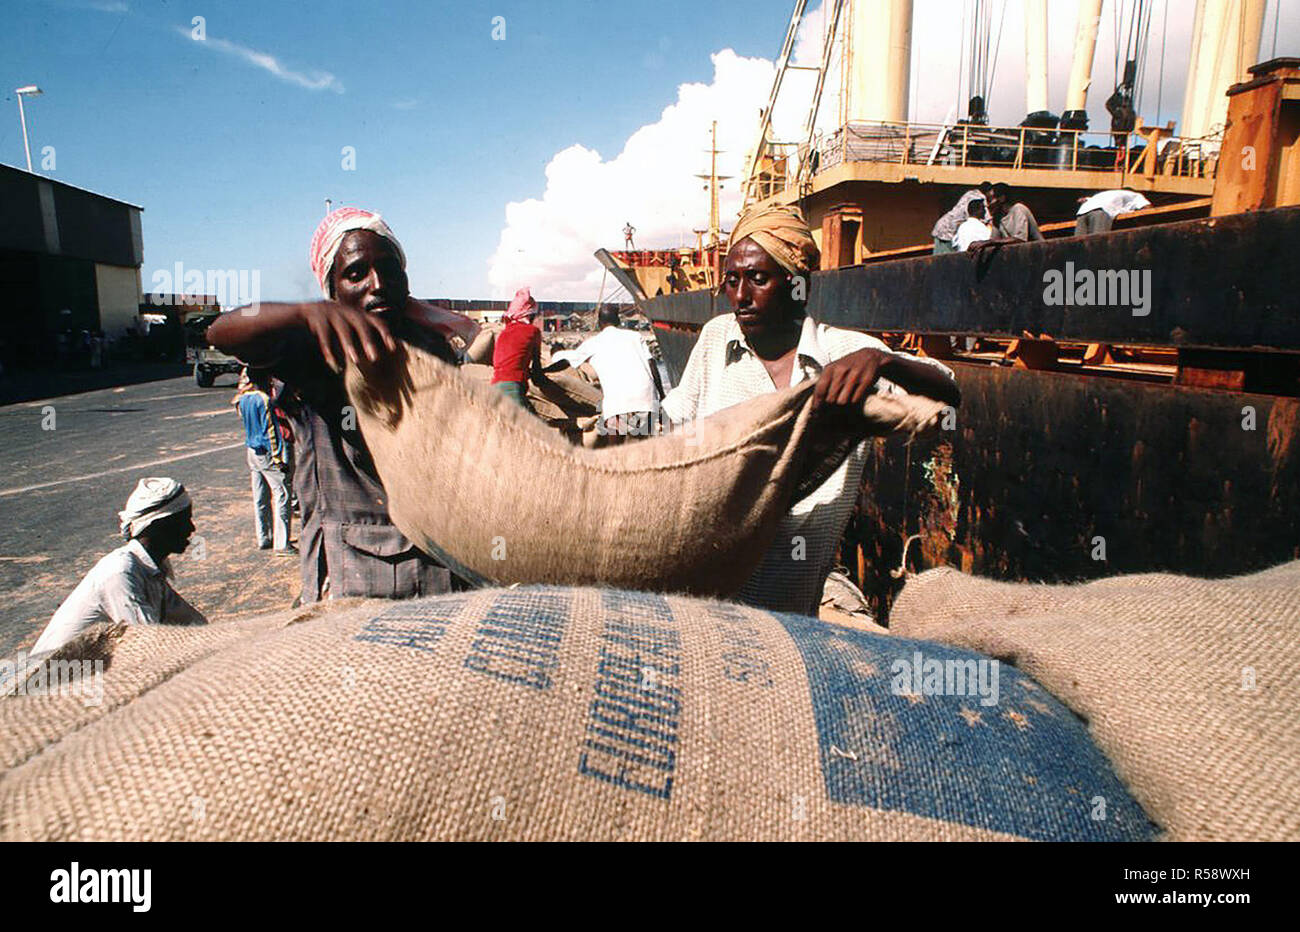 1993 - Somali dock workers carry sacks of wheat in the port as they unload relief supplies for their country. (Mogadishu Somalia) Stock Photo